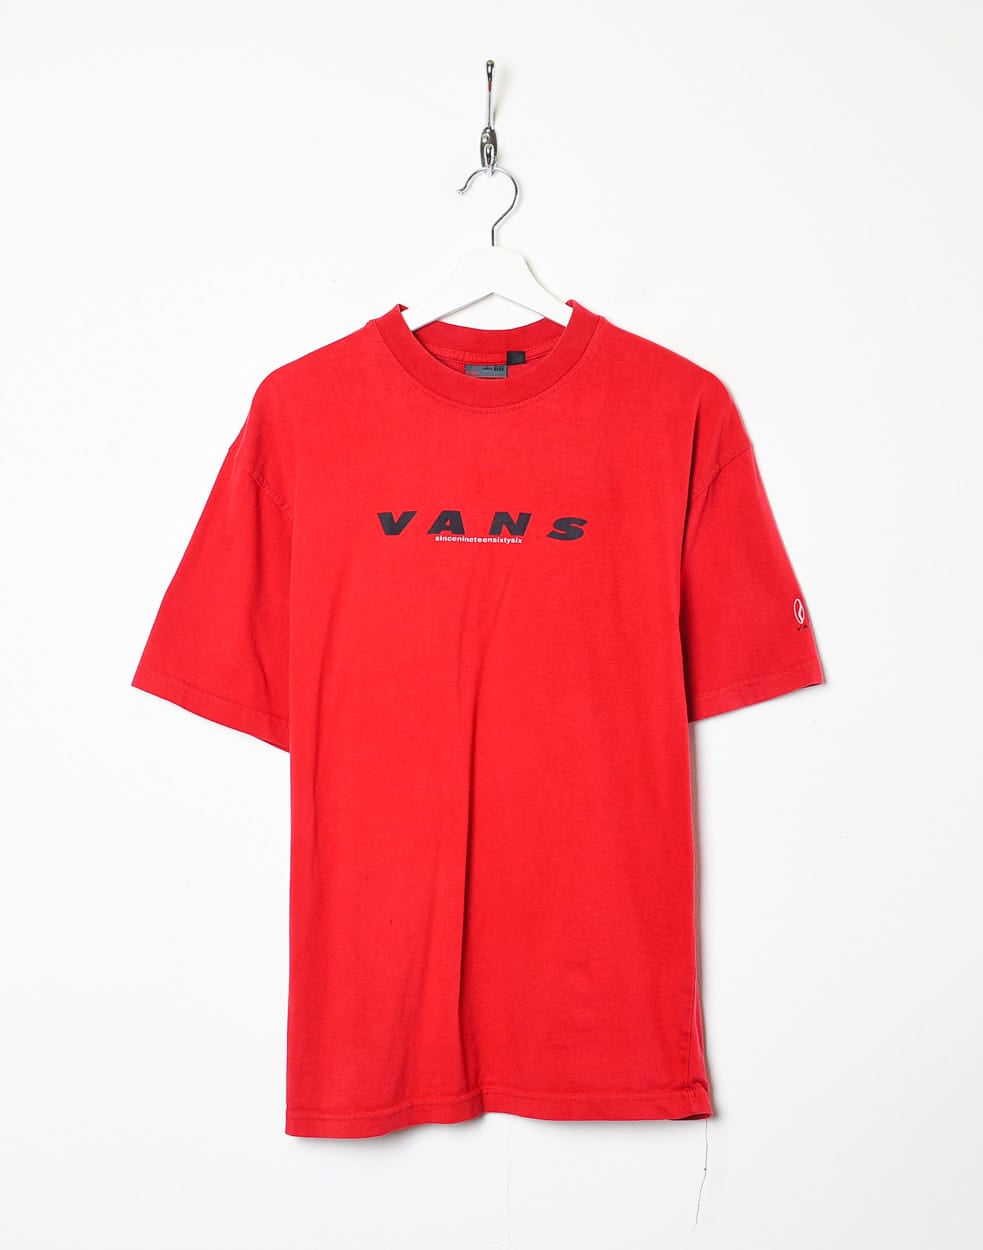 Red Vans T-Shirt - Small